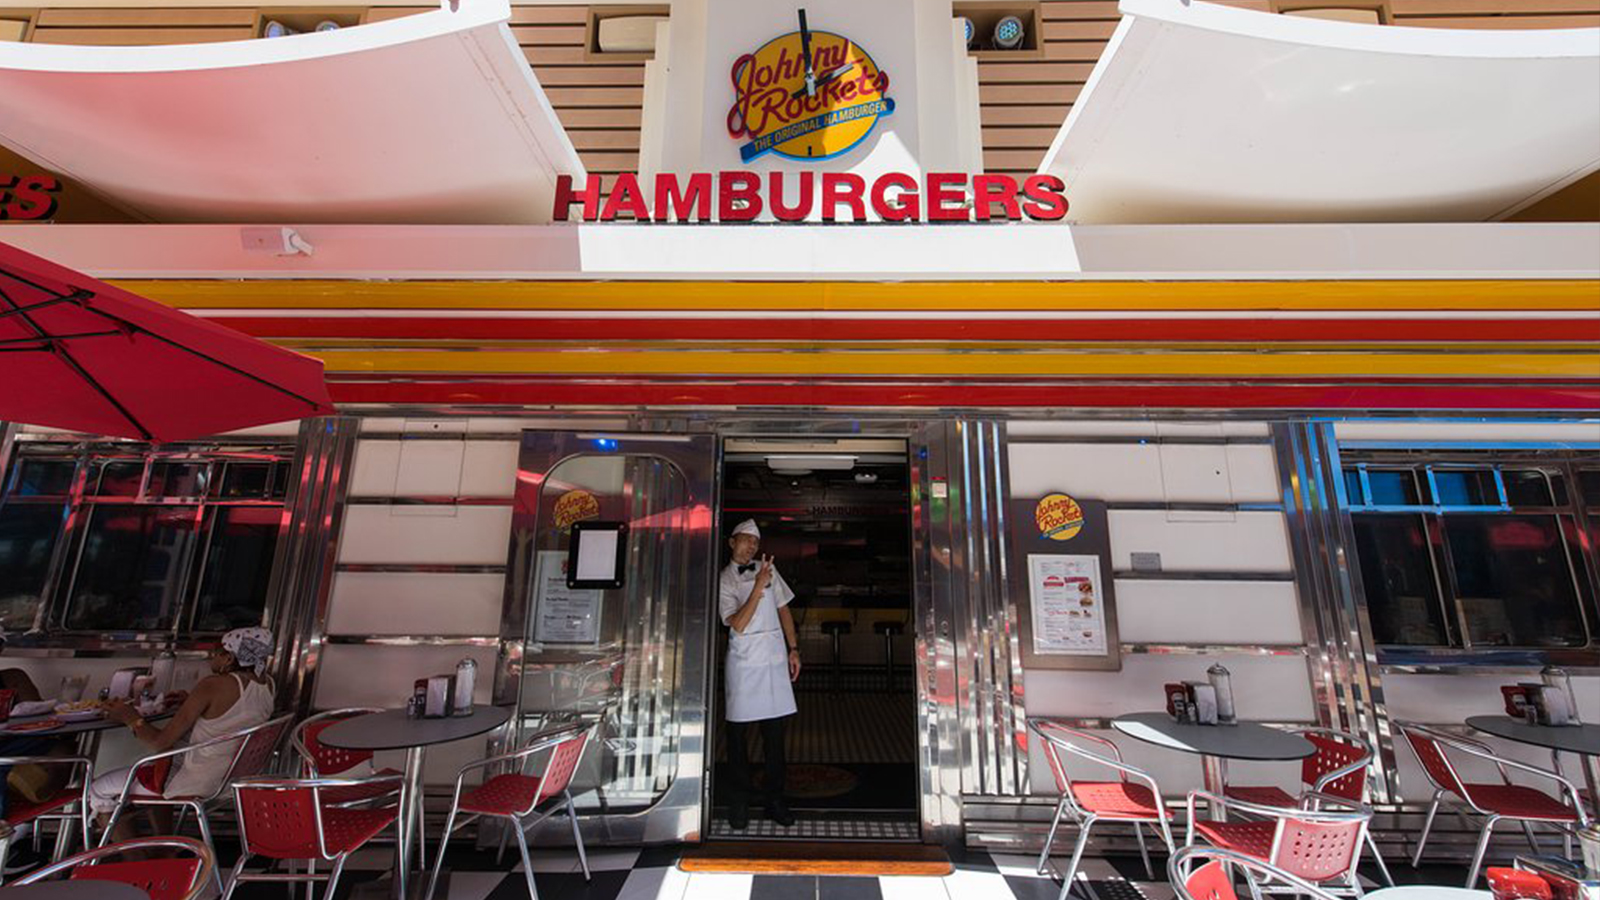 Johnny Rockets on the Royal Caribbean Independence of the Seas